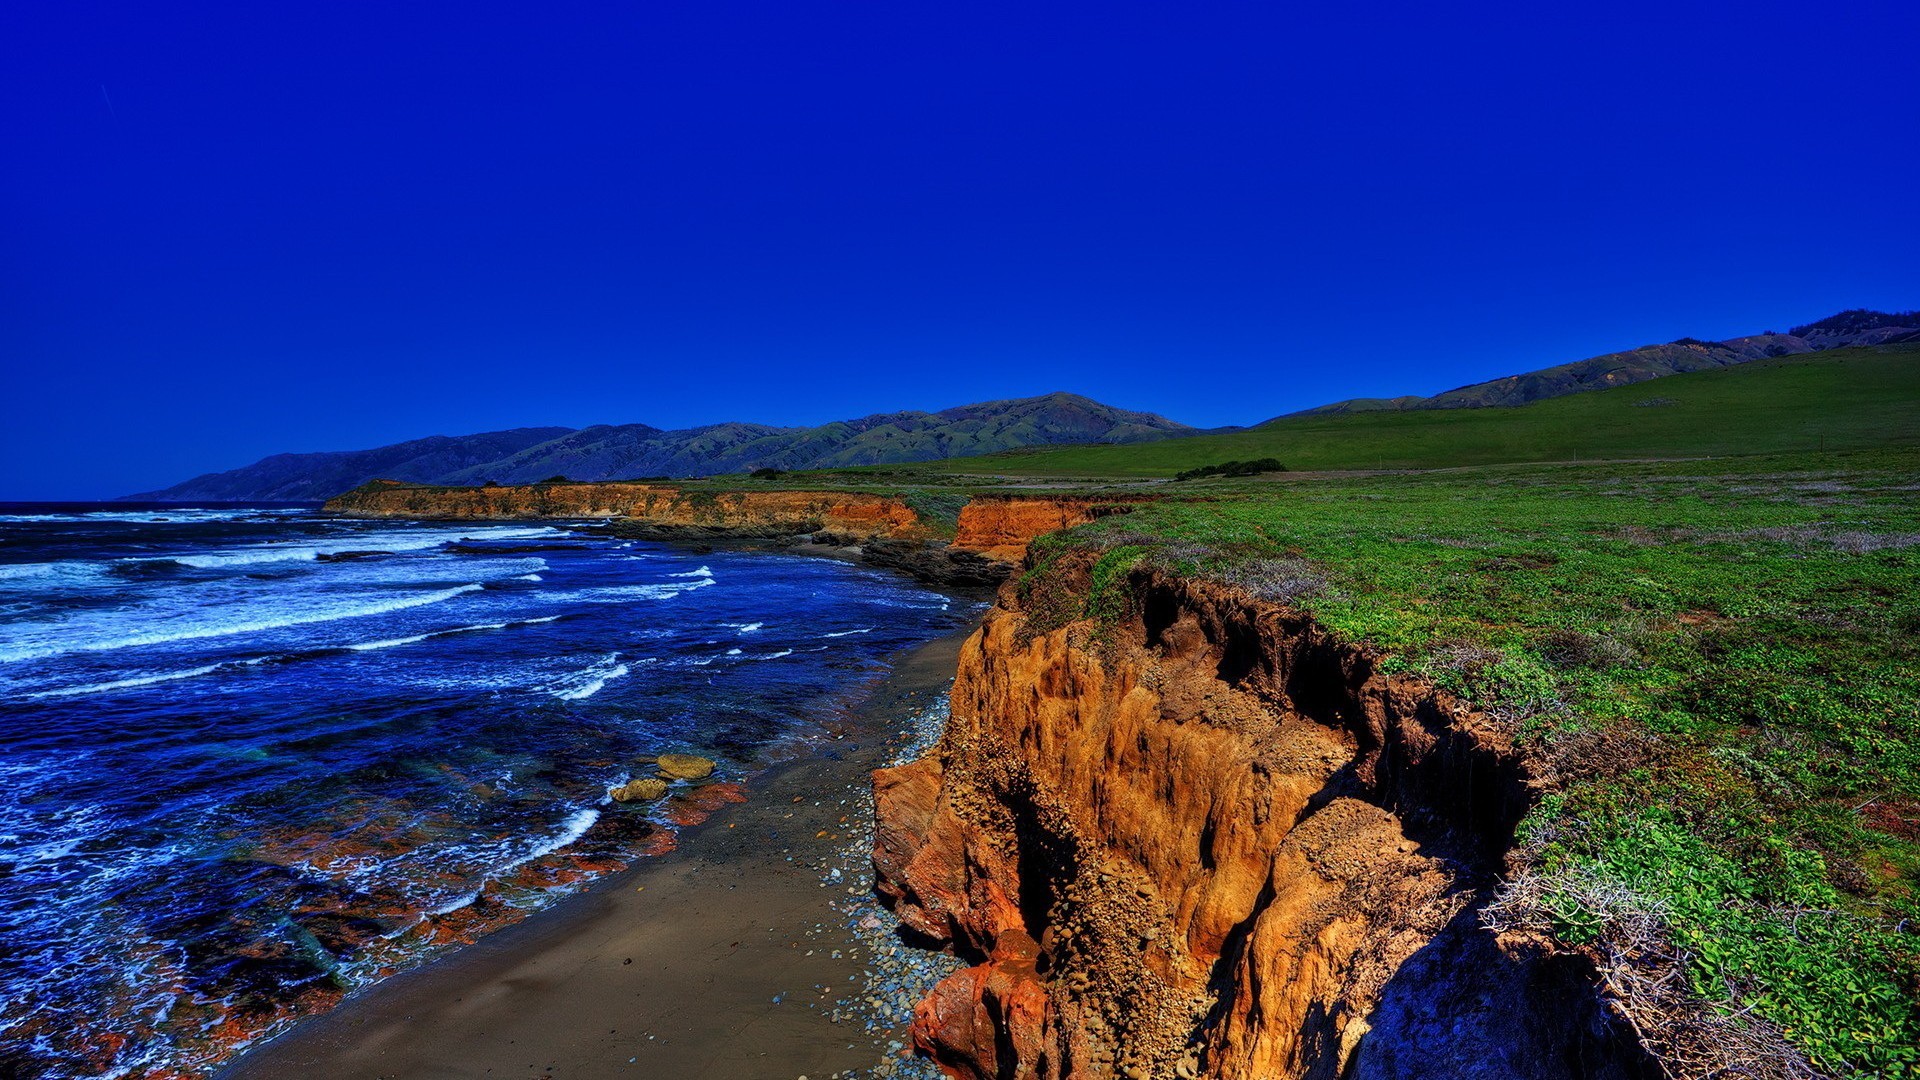 General 1920x1080 beach cliff coast nature landscape clear sky waves sea water hills outdoors